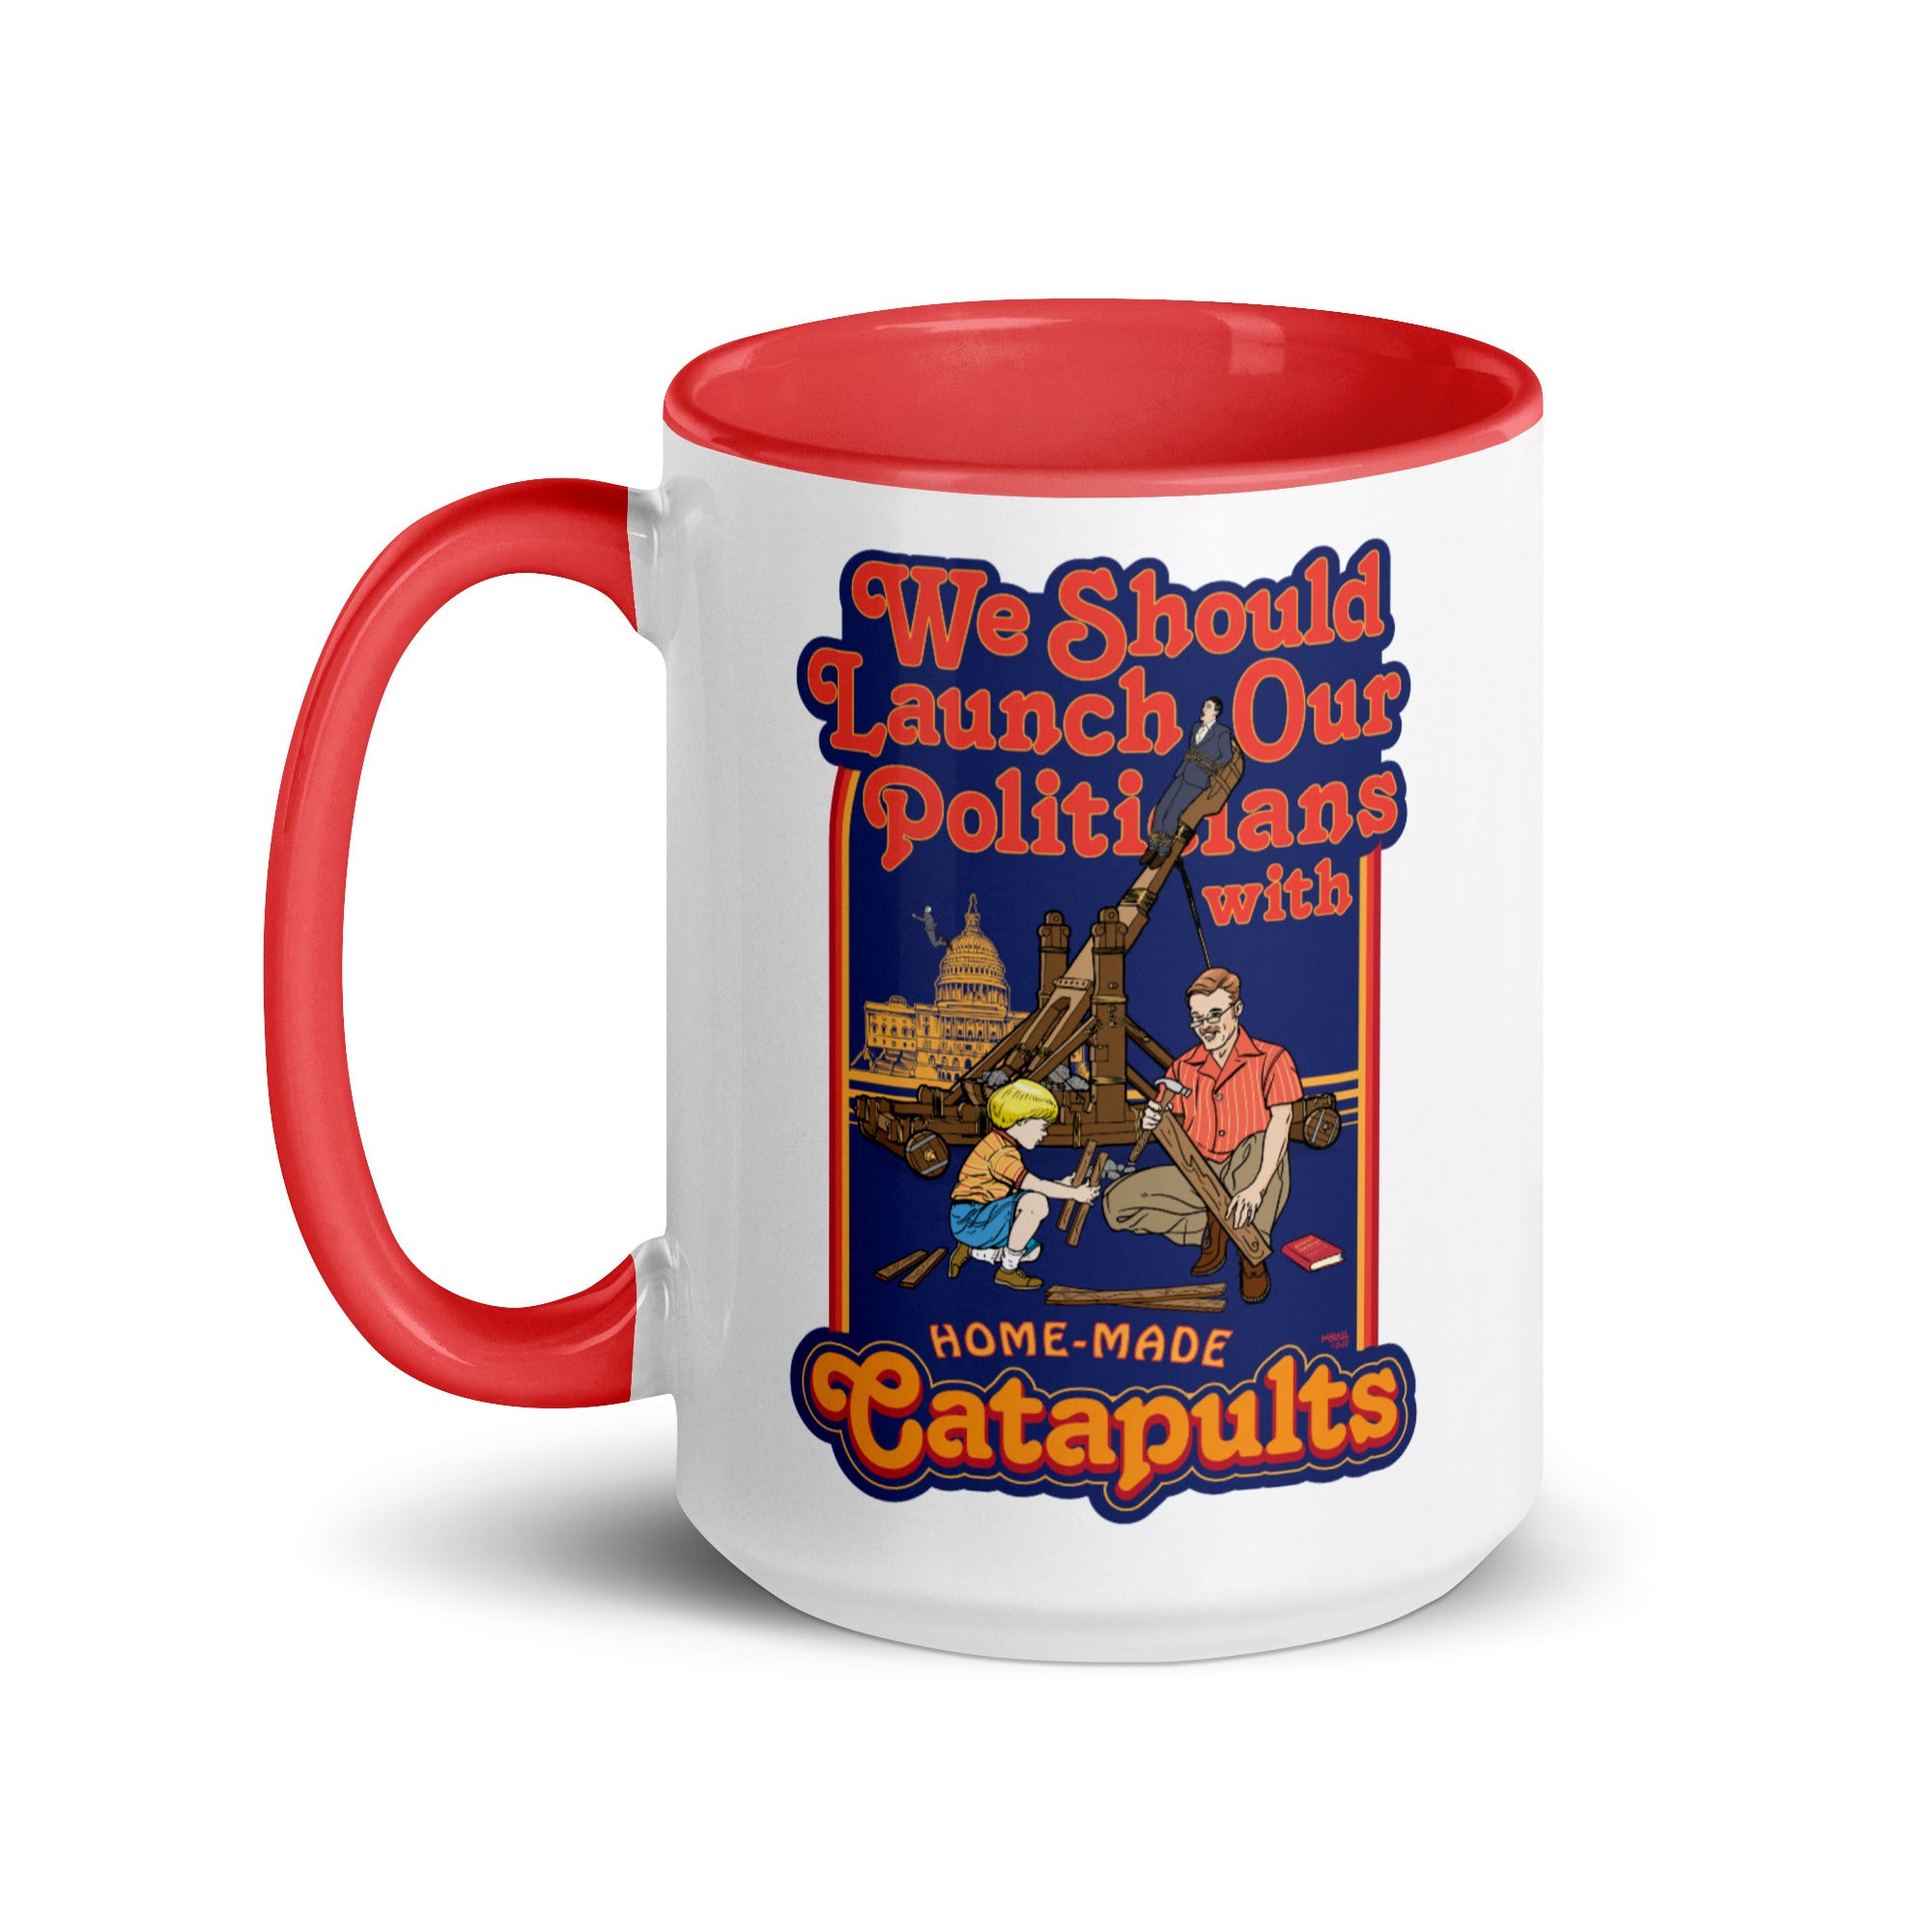 We Should Launch Our Politicians from Catapults Color Mug